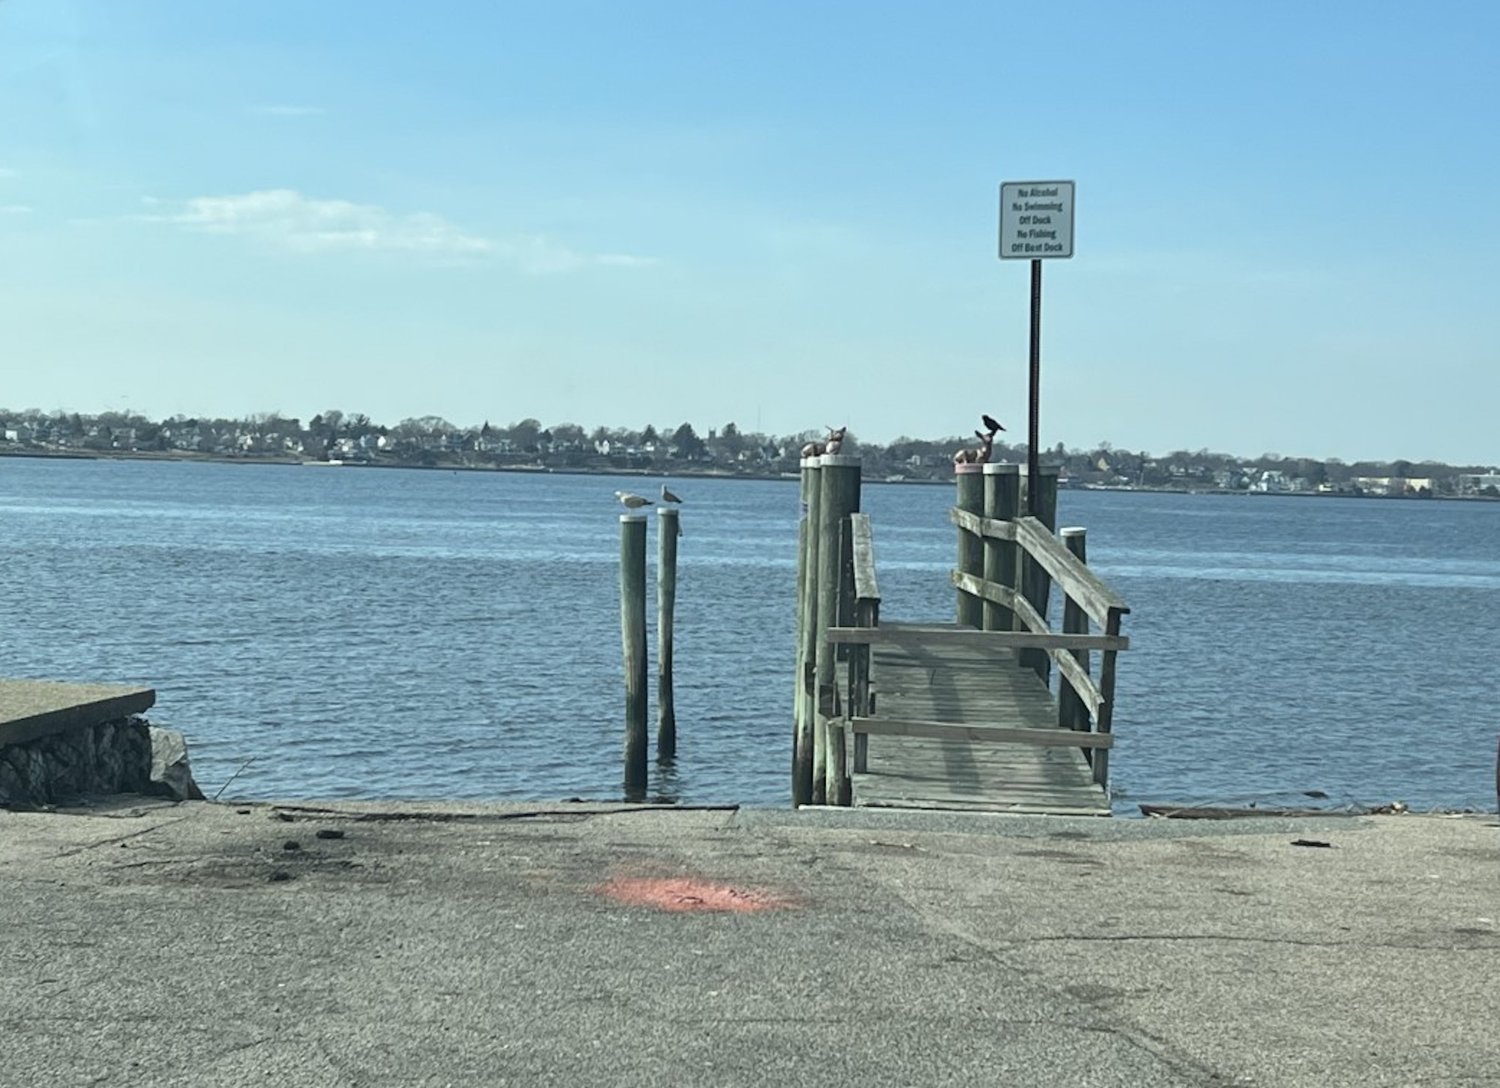 The Sabin Point boat ramp as it looked Wednesday, March 22.